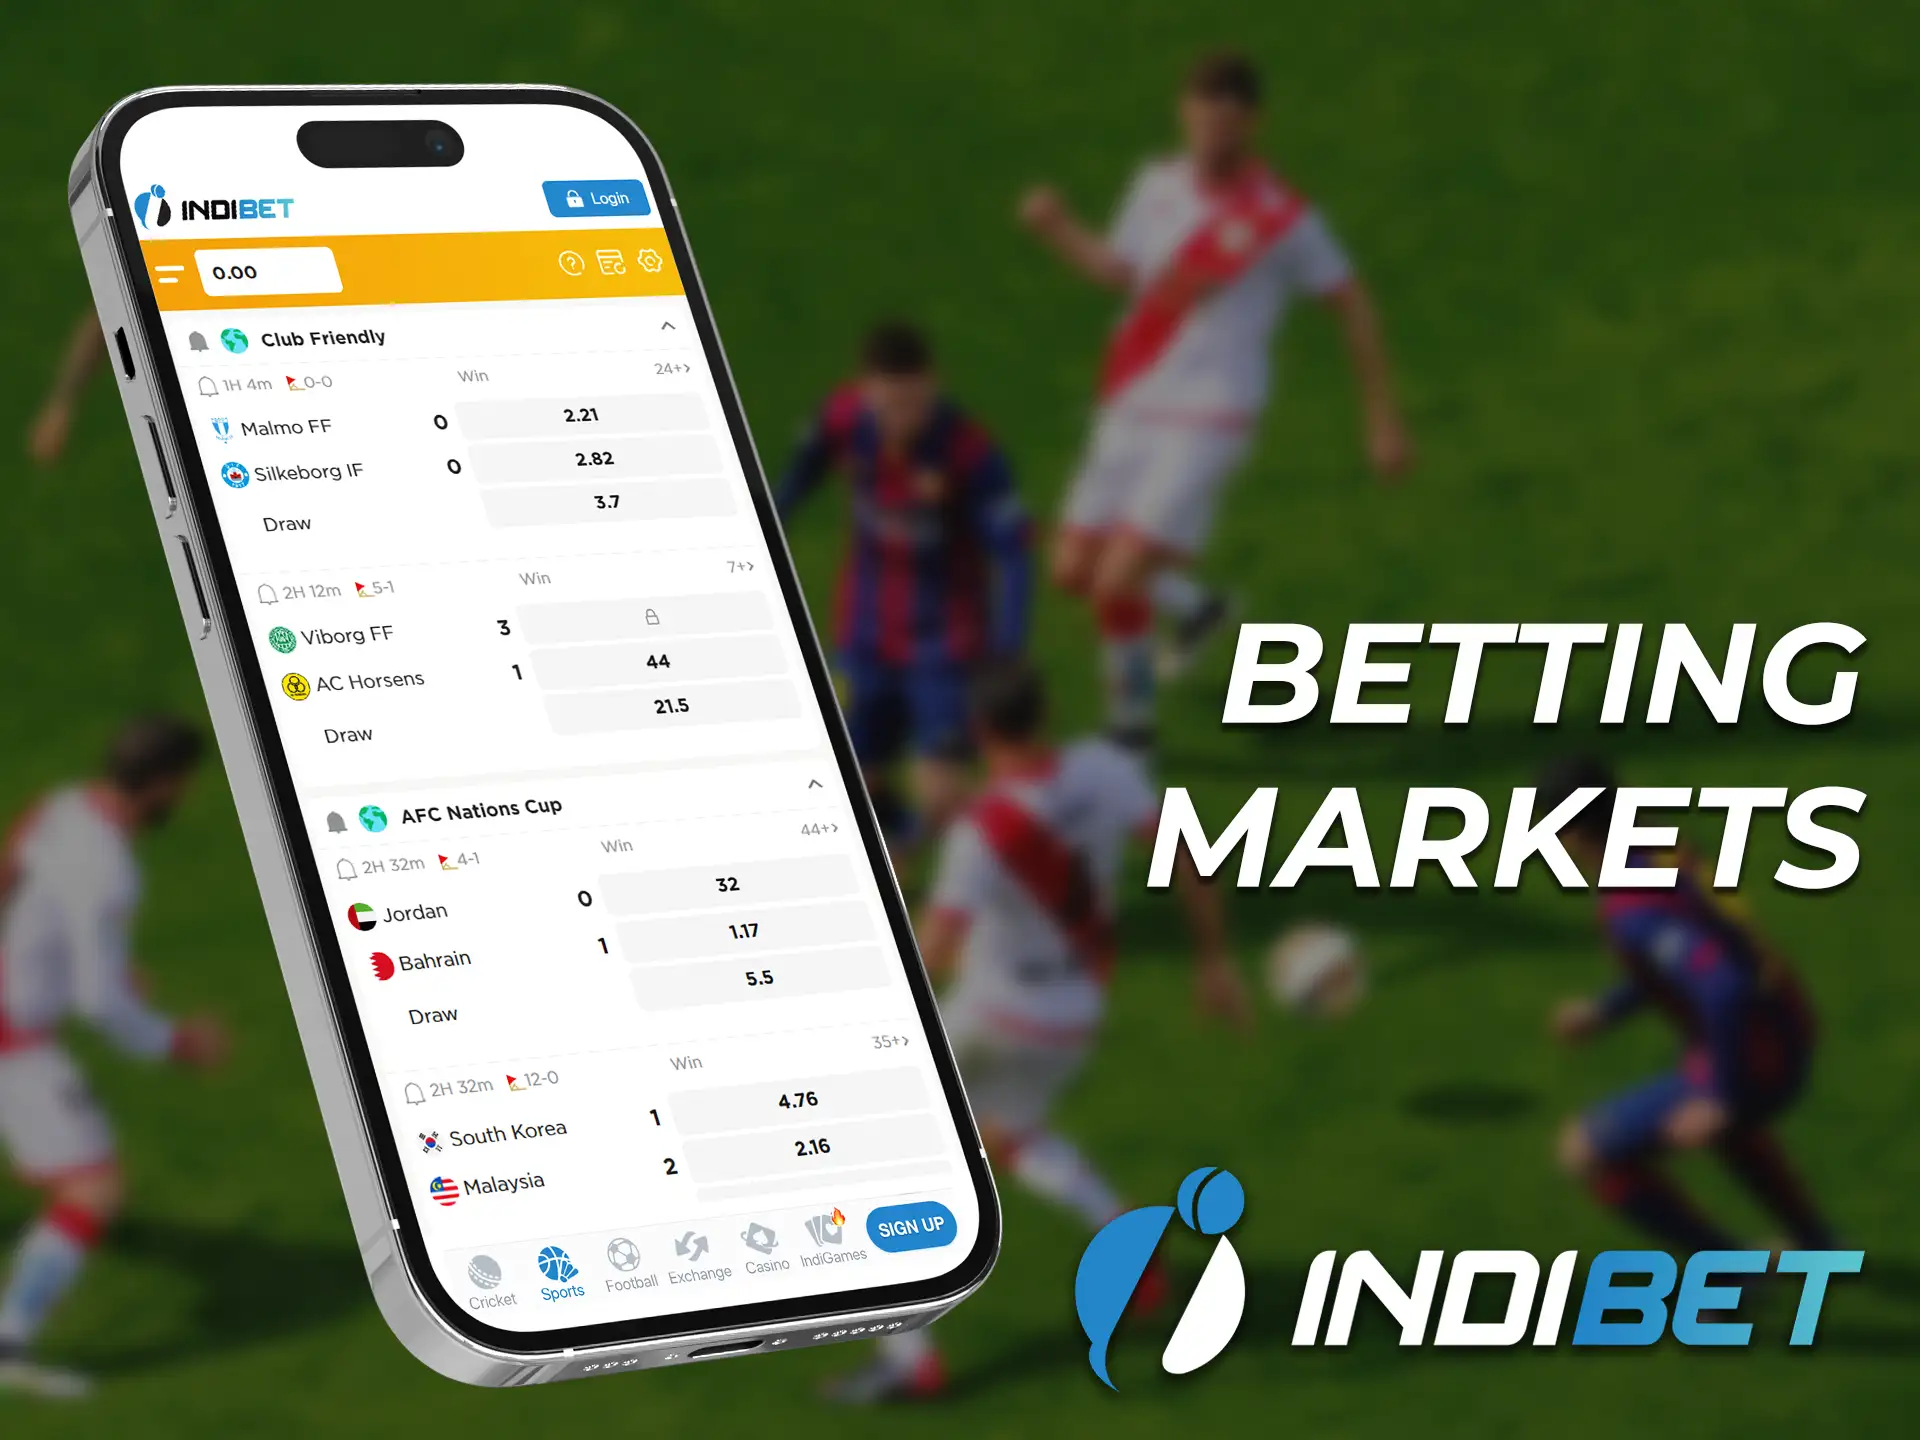 There are dozens of betting markets available to players on the Indibet app.